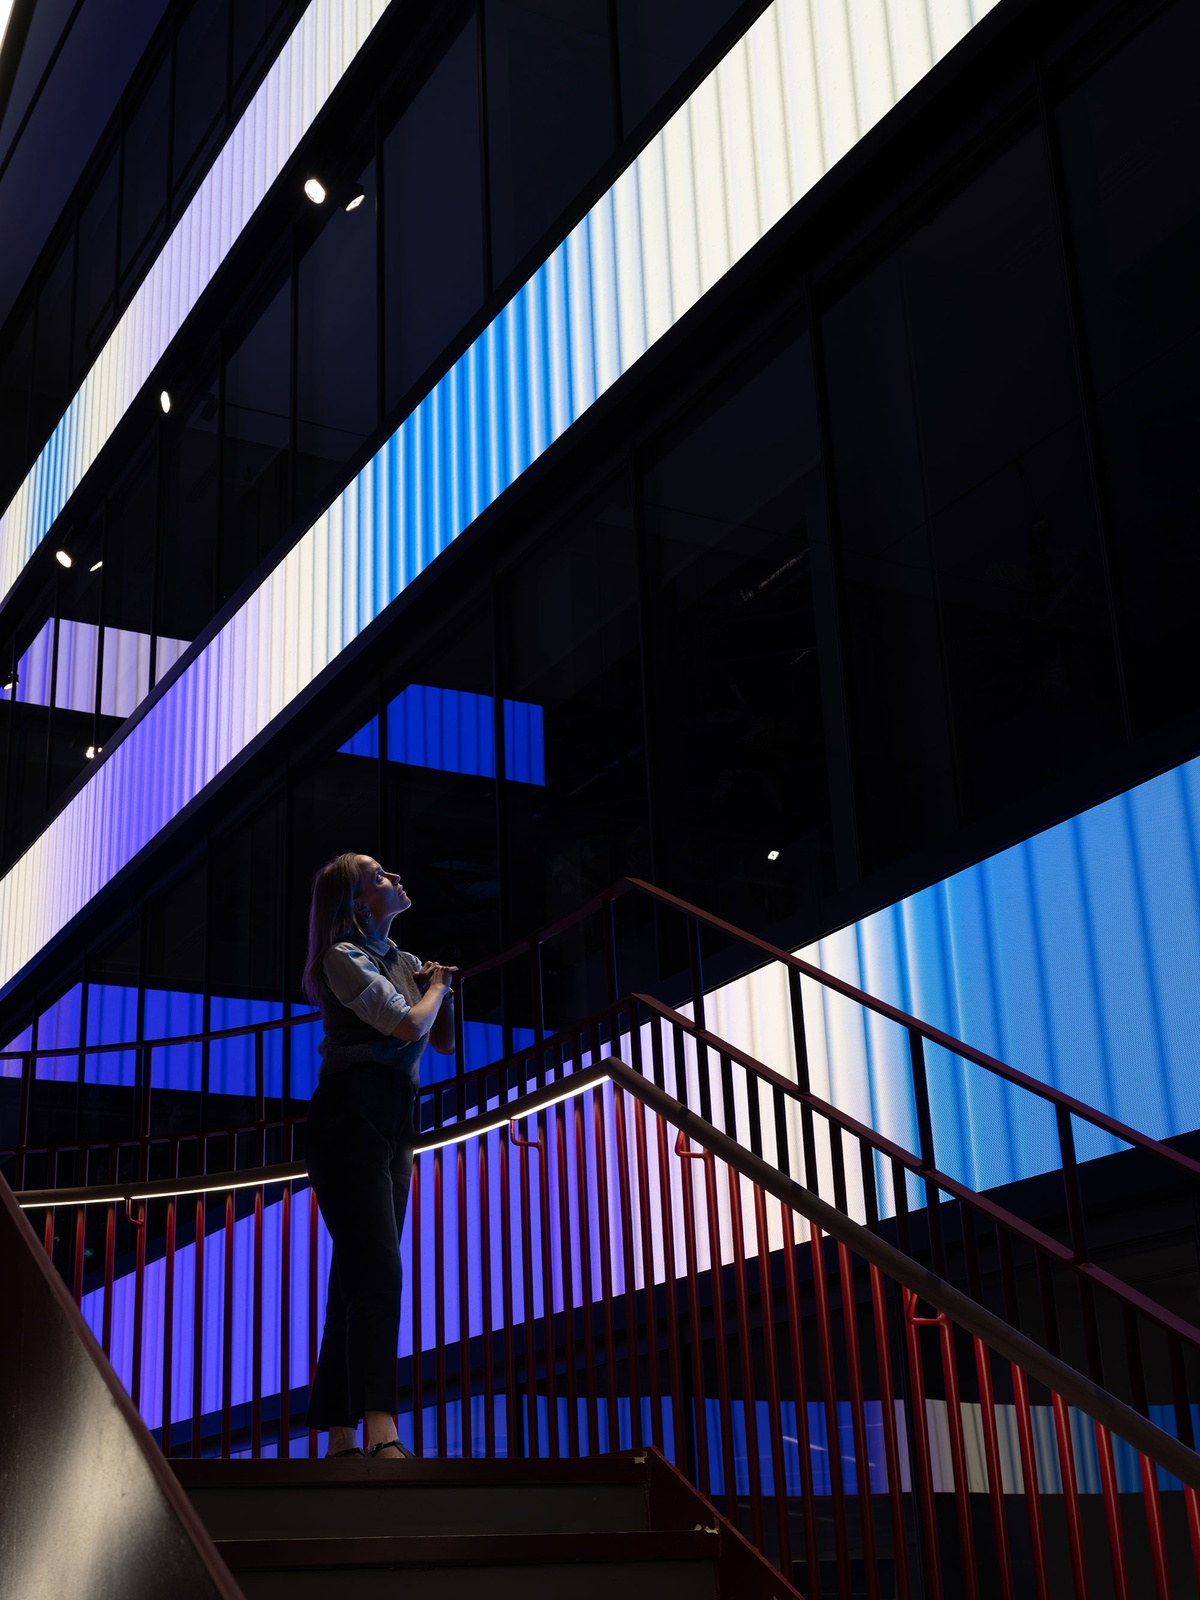 Woman standing on staircase, looking up at installation in atrium, with bands of purple, white and blue